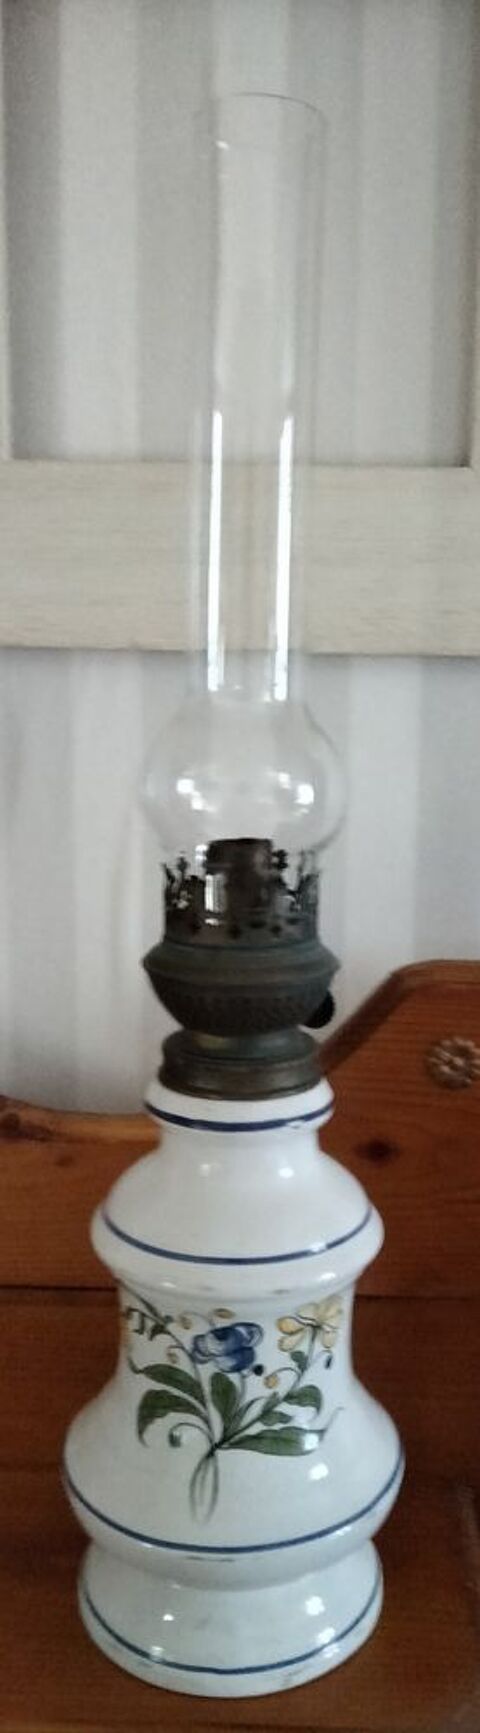 Lampe  huile Kosmos Brenner. Moustiers. 30 Vierzon (18)